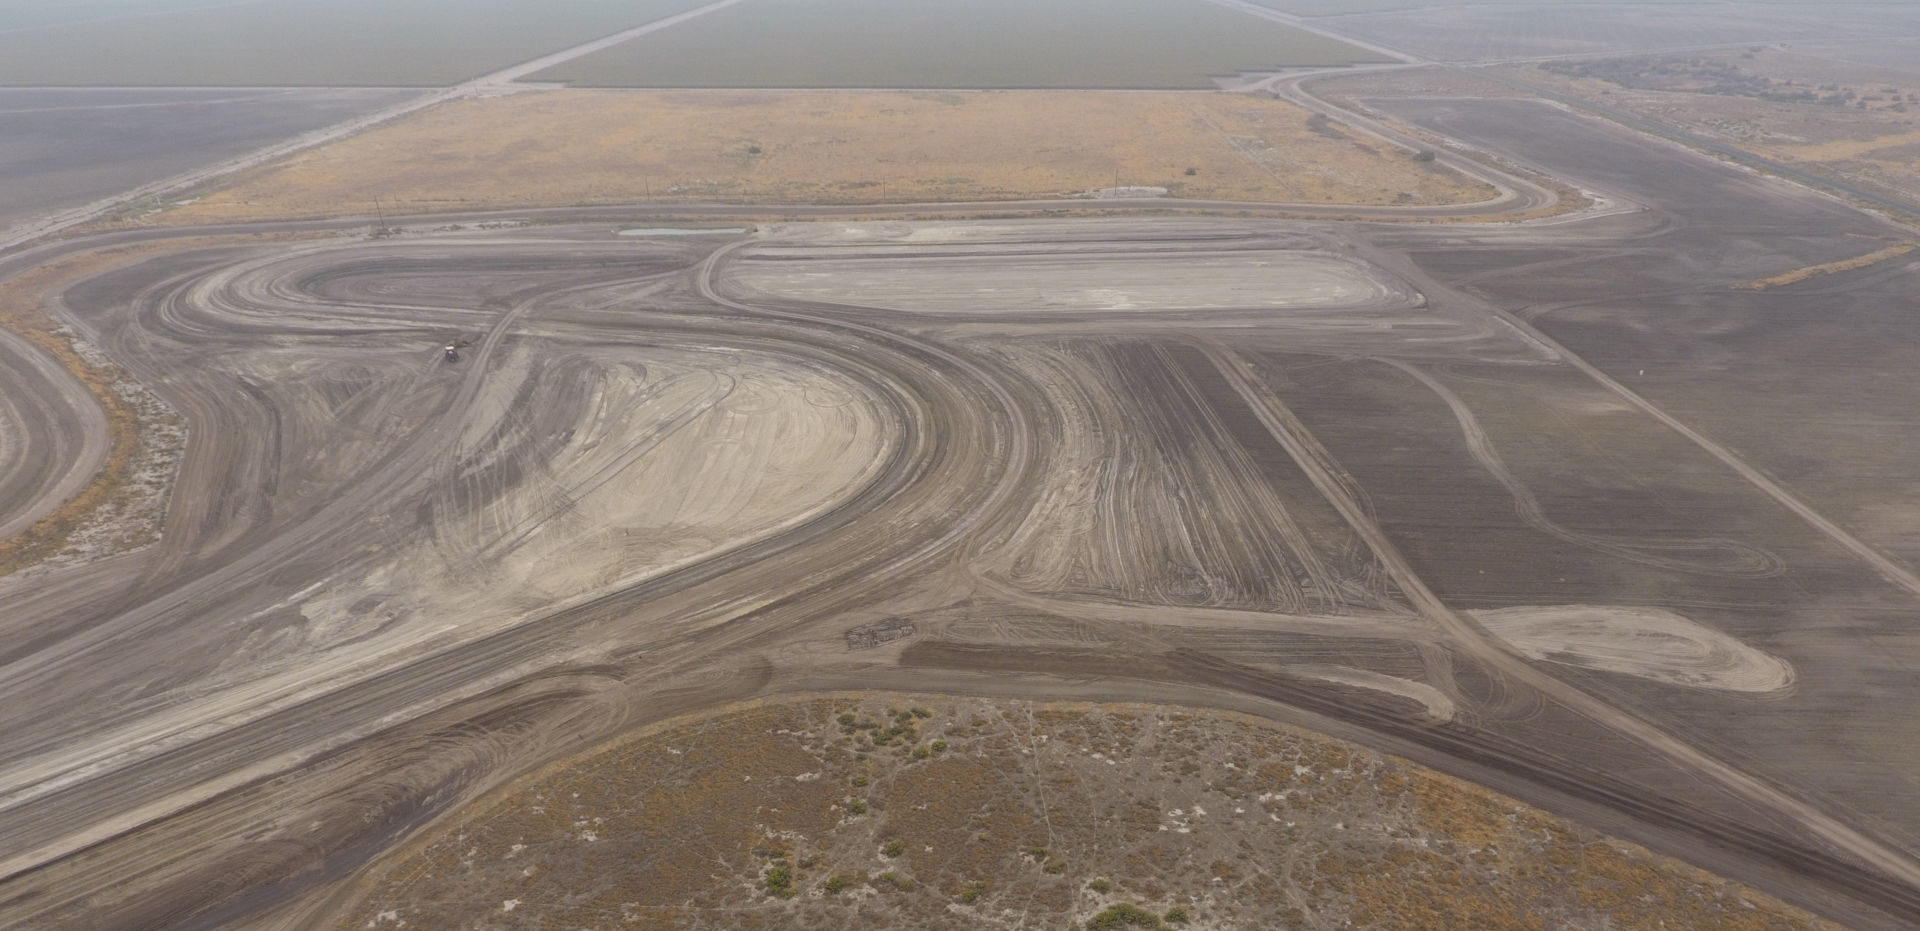 The new course under construction at Buttonwillow Raceway Park. Photo by CaliPhotography, courtesy CRA.